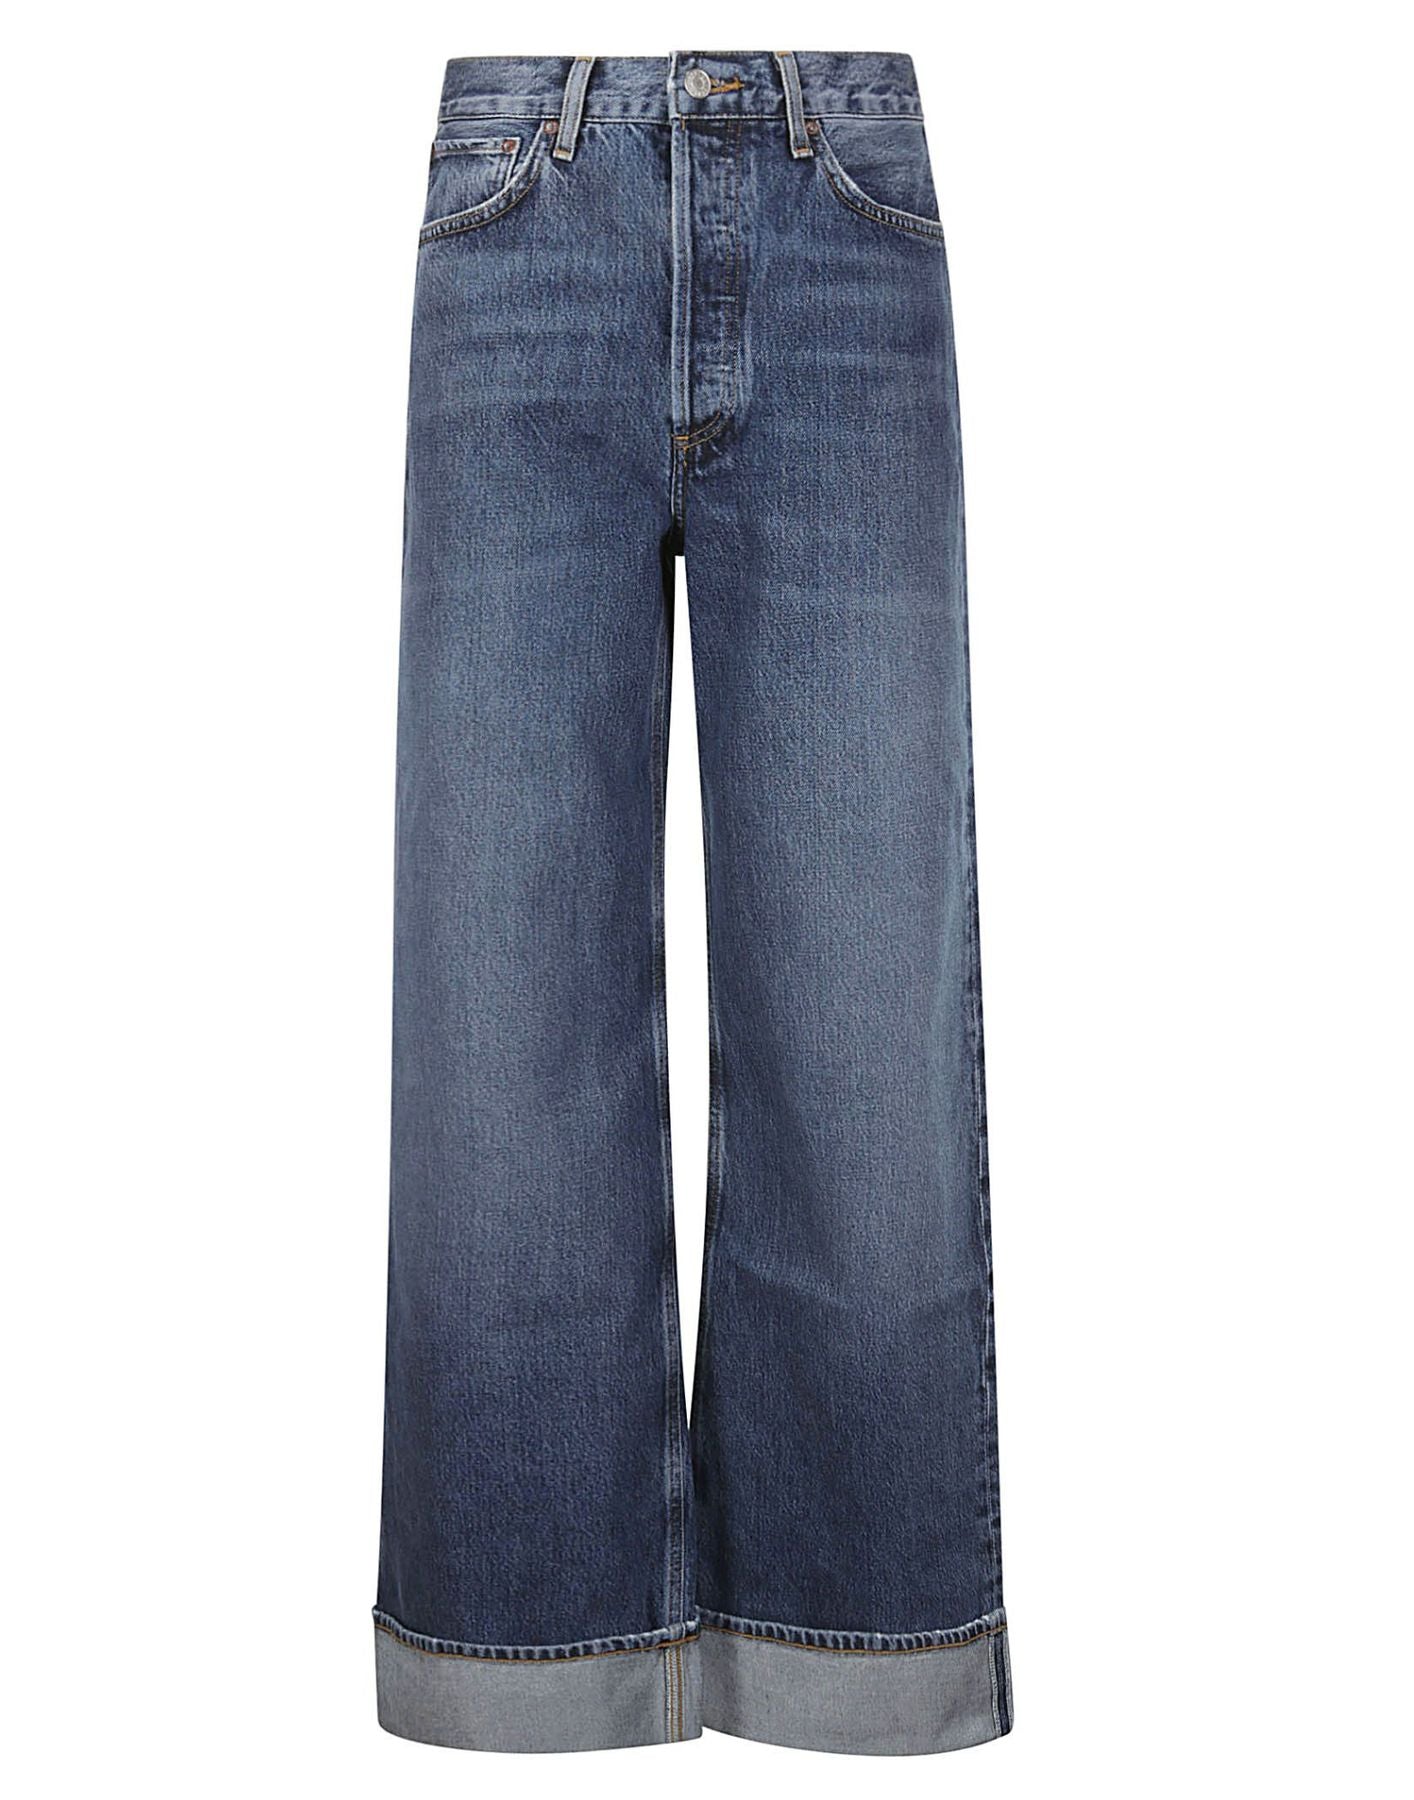 Jeans Woman A9159 1206 Control Agolde